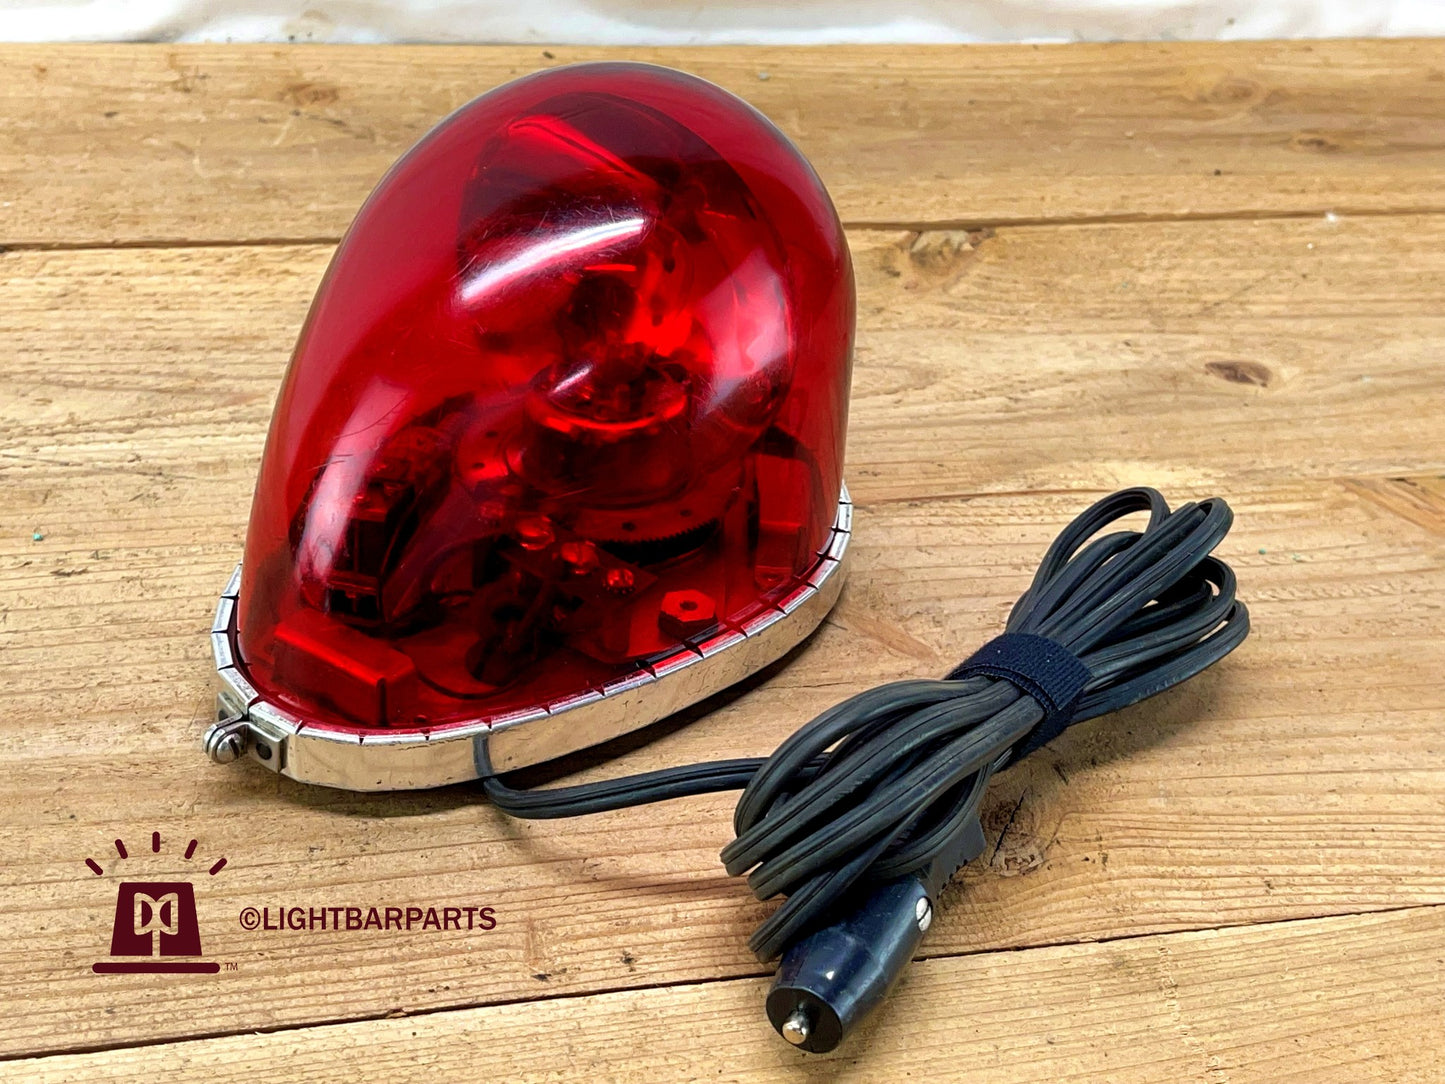 Federal Signal - Red Fire Ball - Rare First Generation - Model FB-1 / 2A12  / 12v